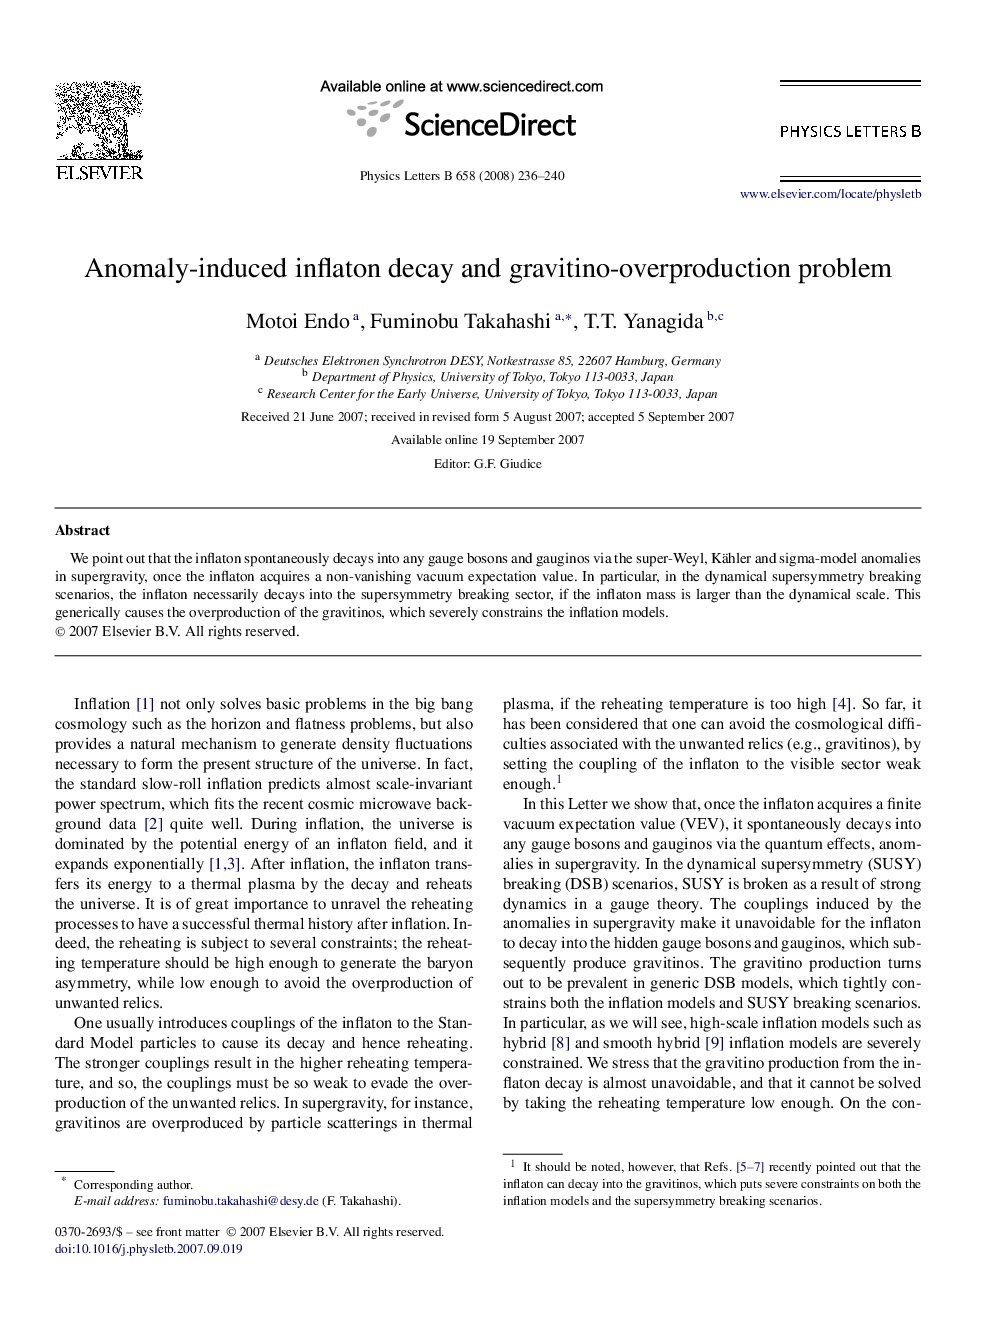 Anomaly-induced inflaton decay and gravitino-overproduction problem